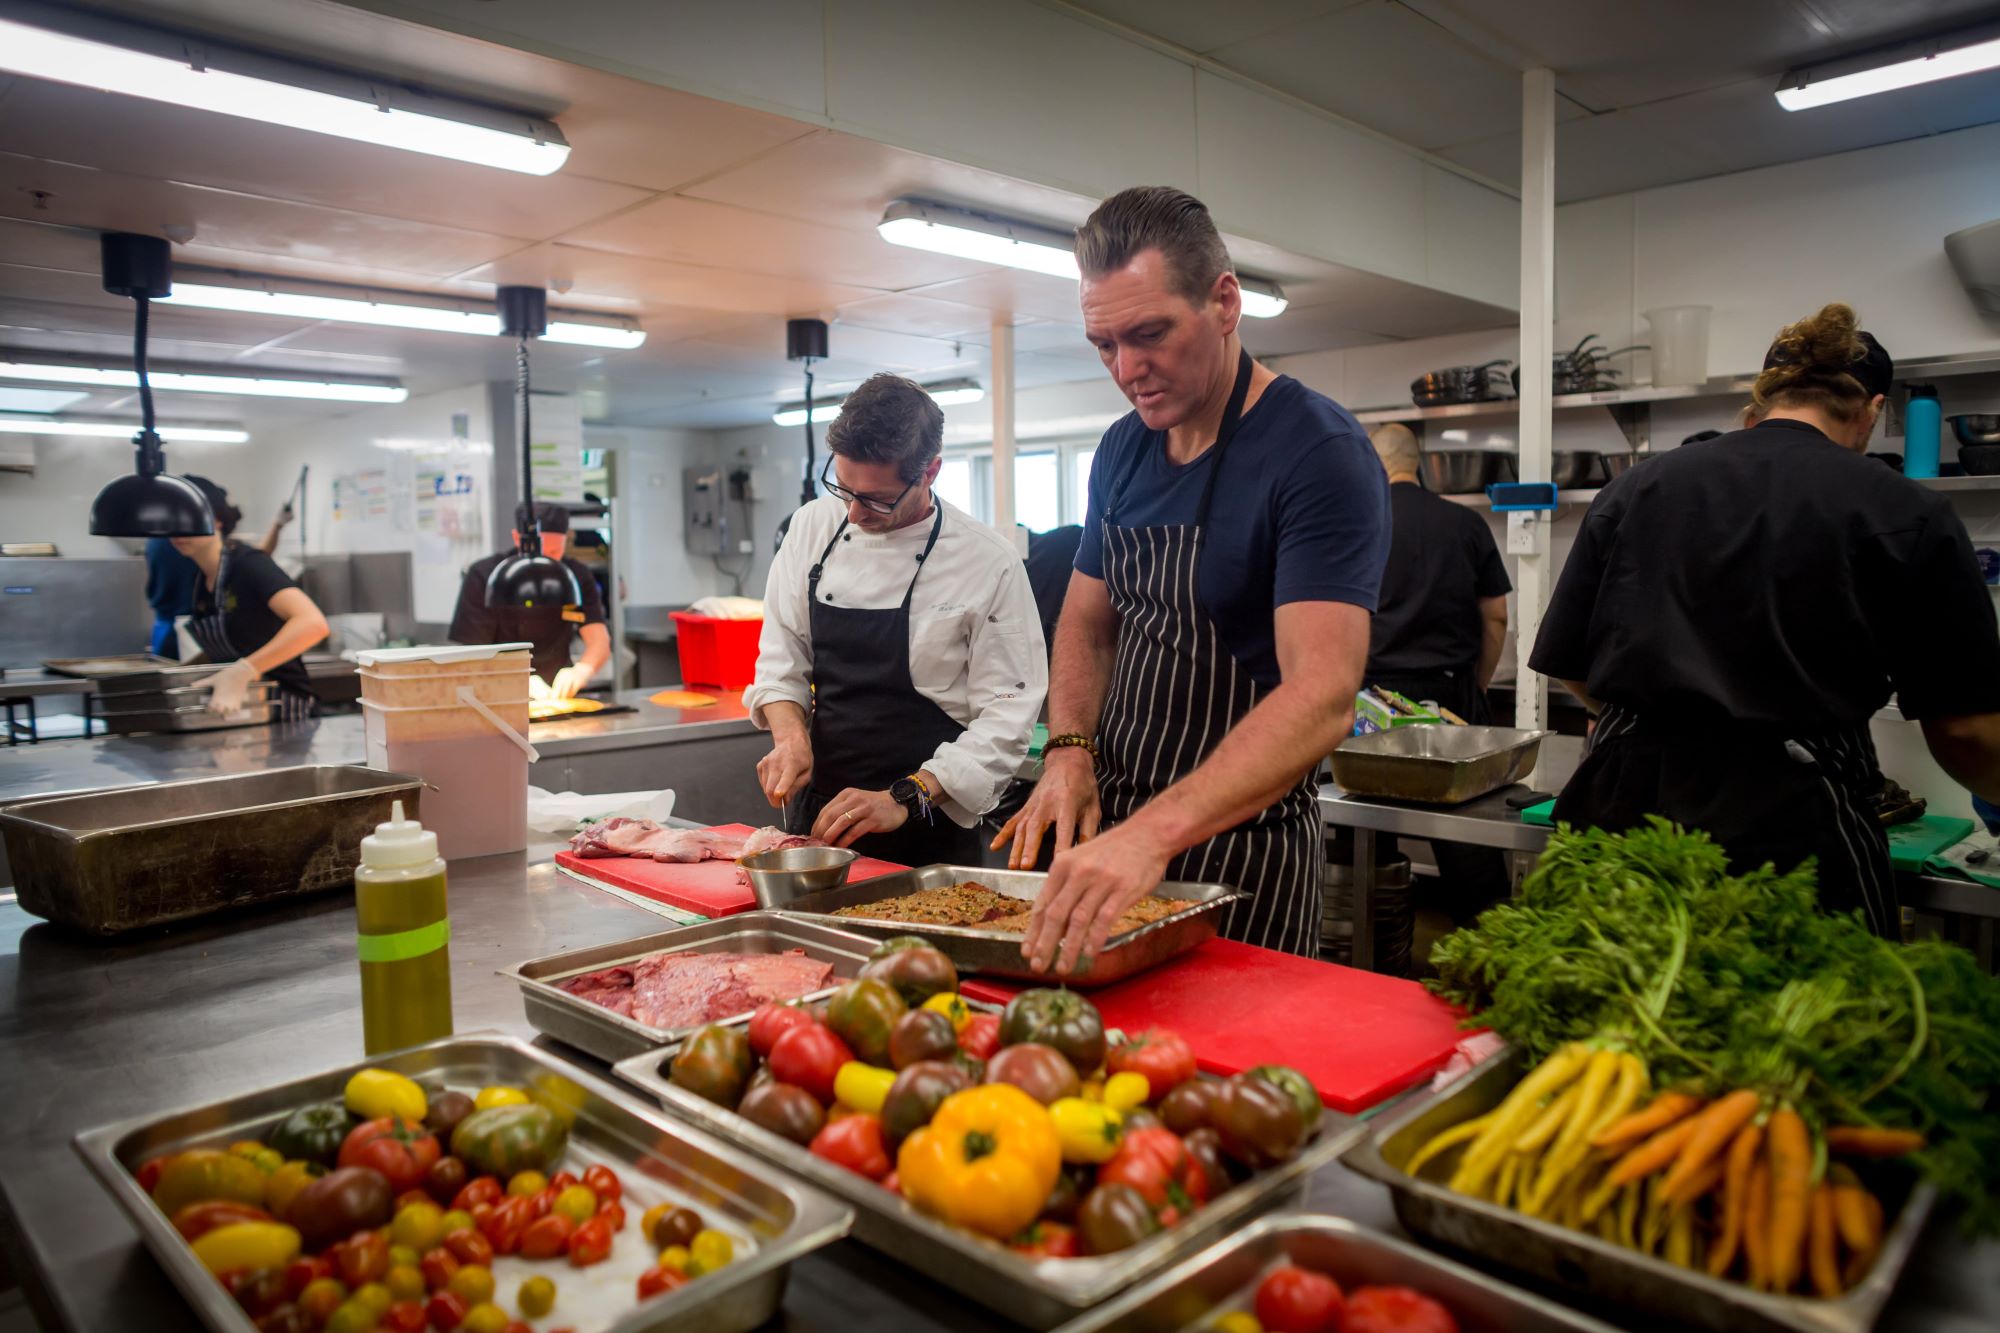 Mauro Battaglia and Justin North hard at work in the kitchen at Walter Peak High Country Farm